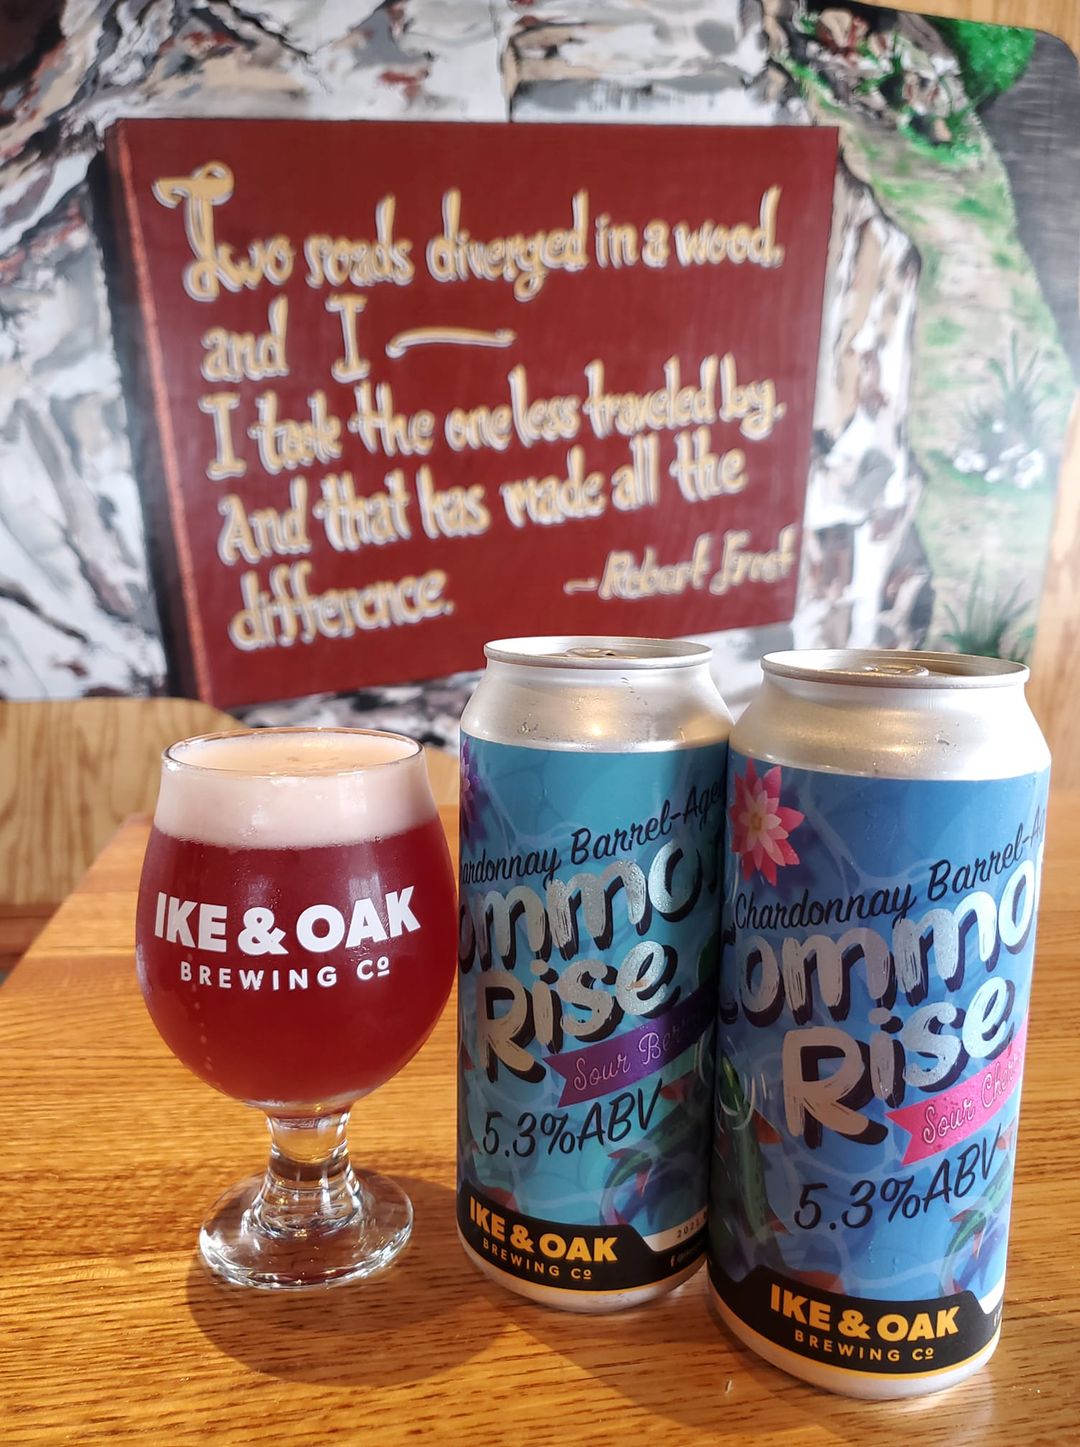 Glass and two cans of Ike & Oak Brewing's Common Rise